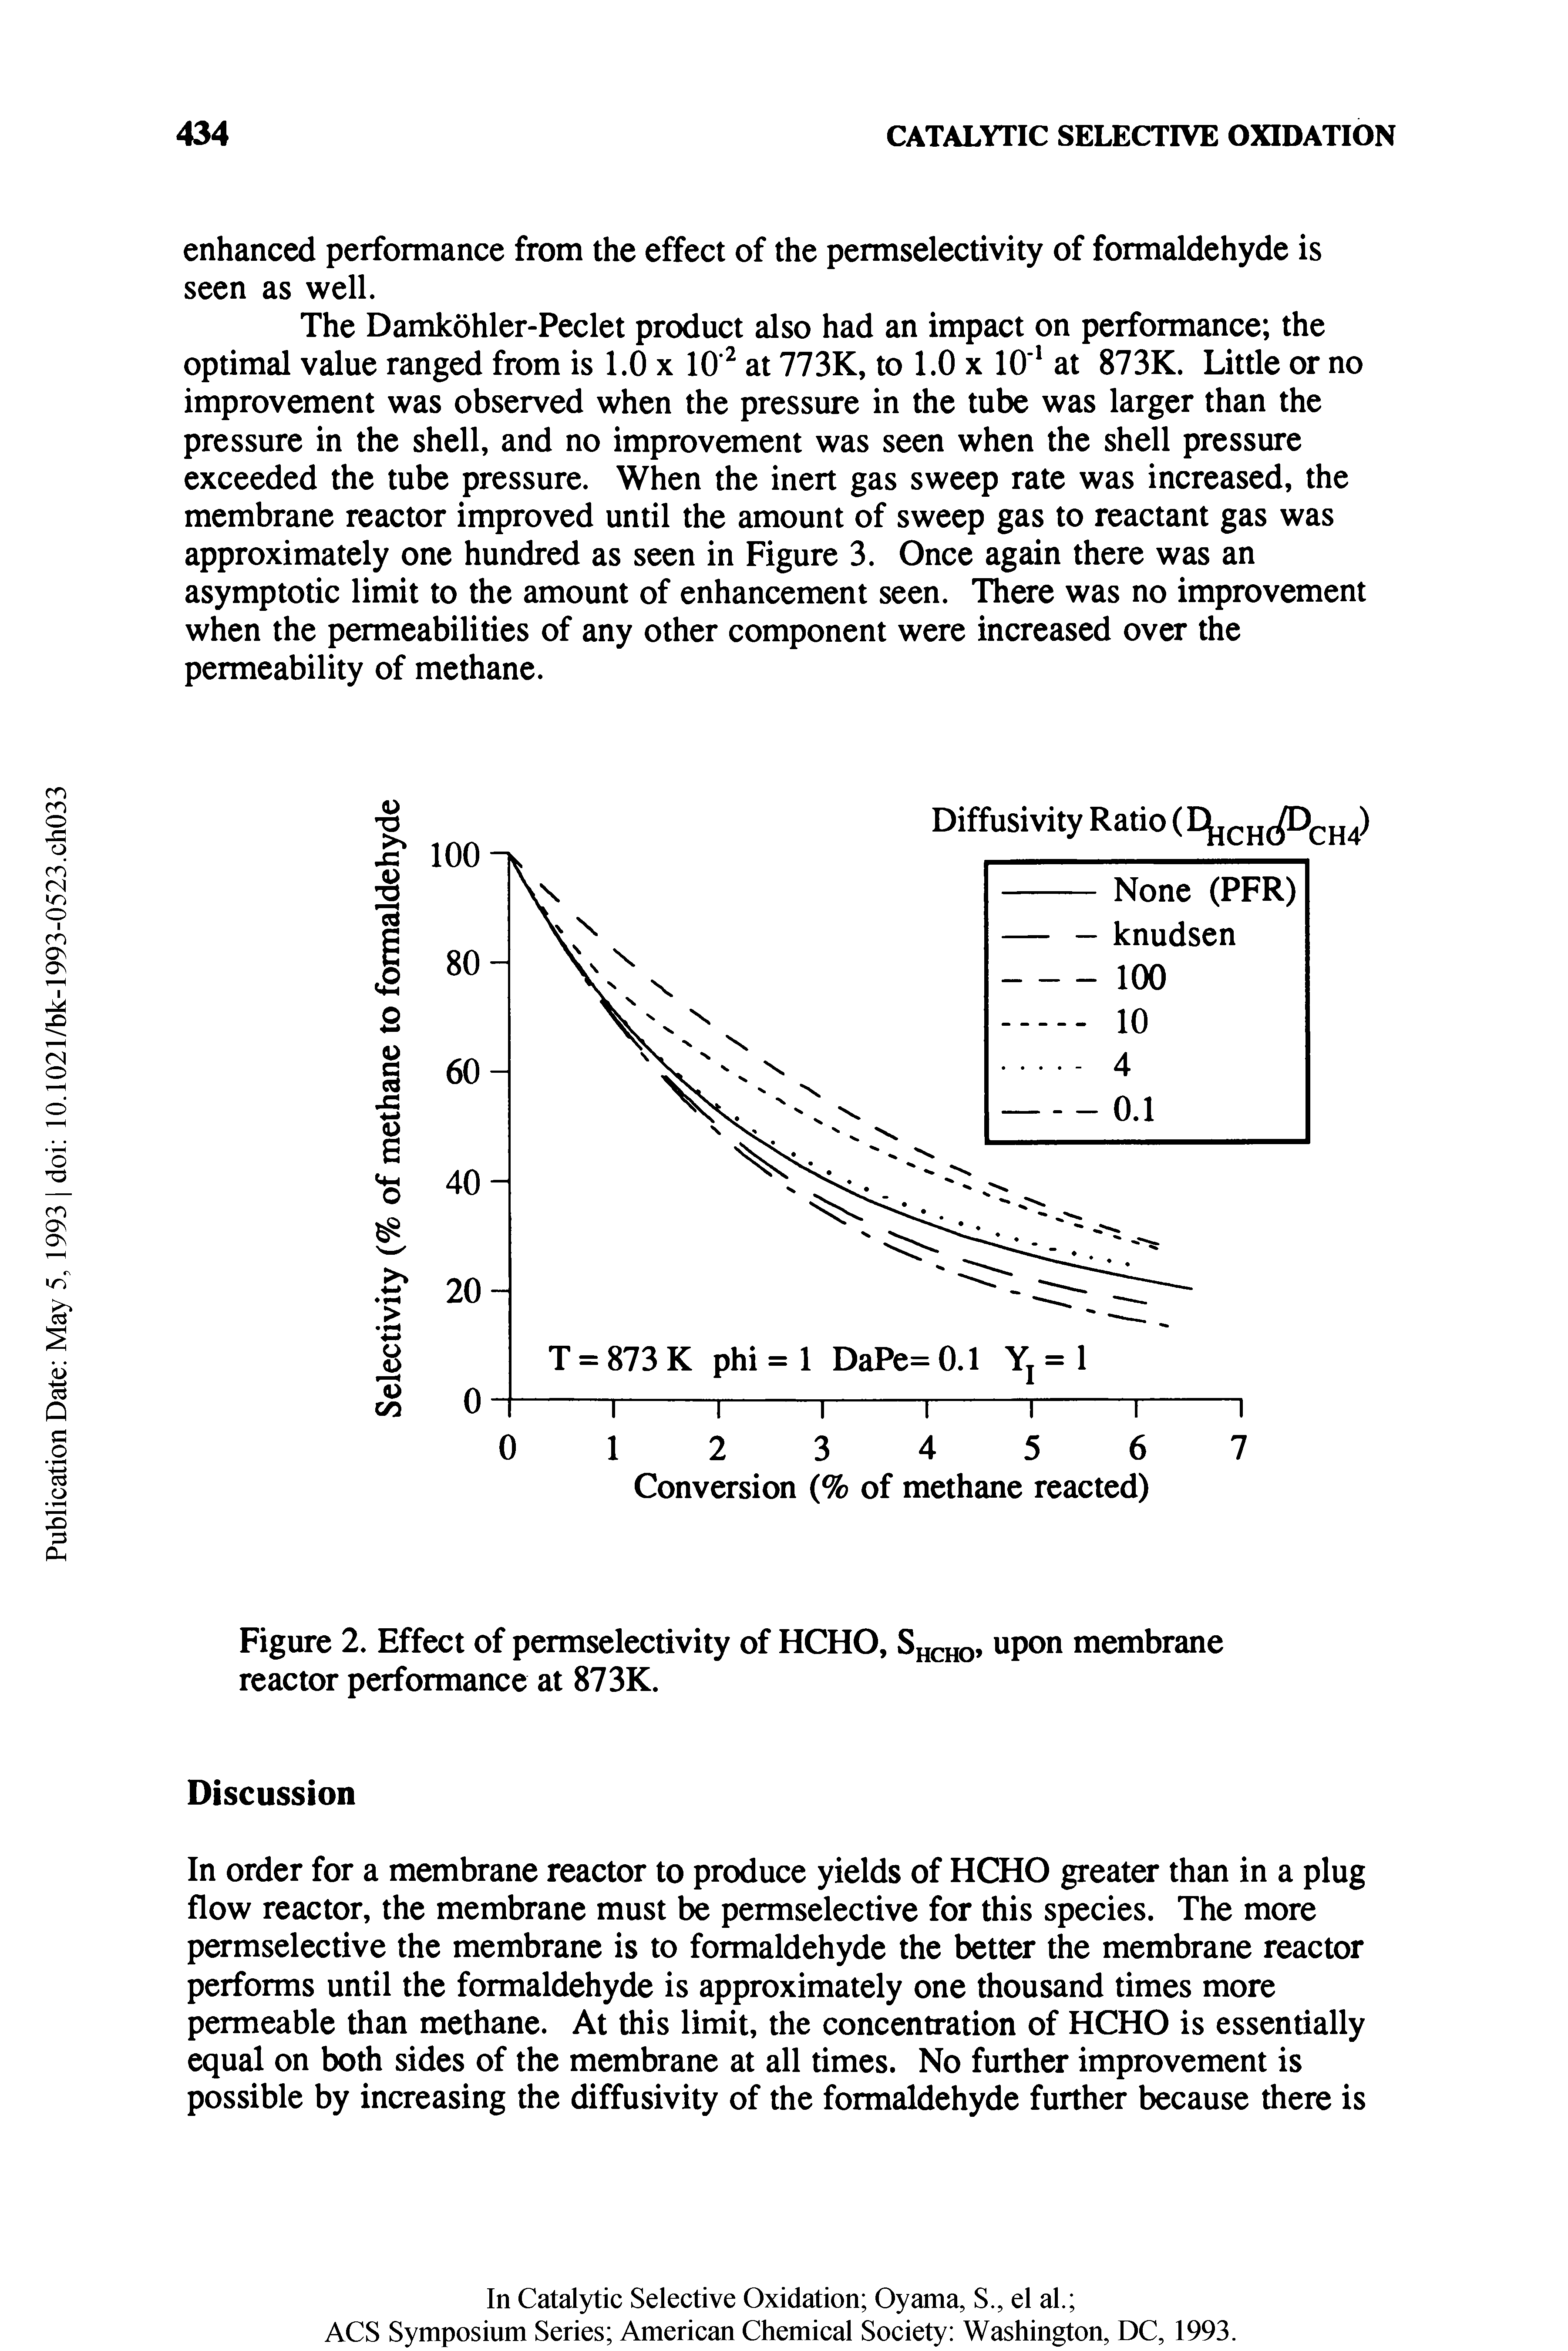 Figure 2. Effect of permselectivity of HCHO, Shcho membrane reactor performance at 873K.